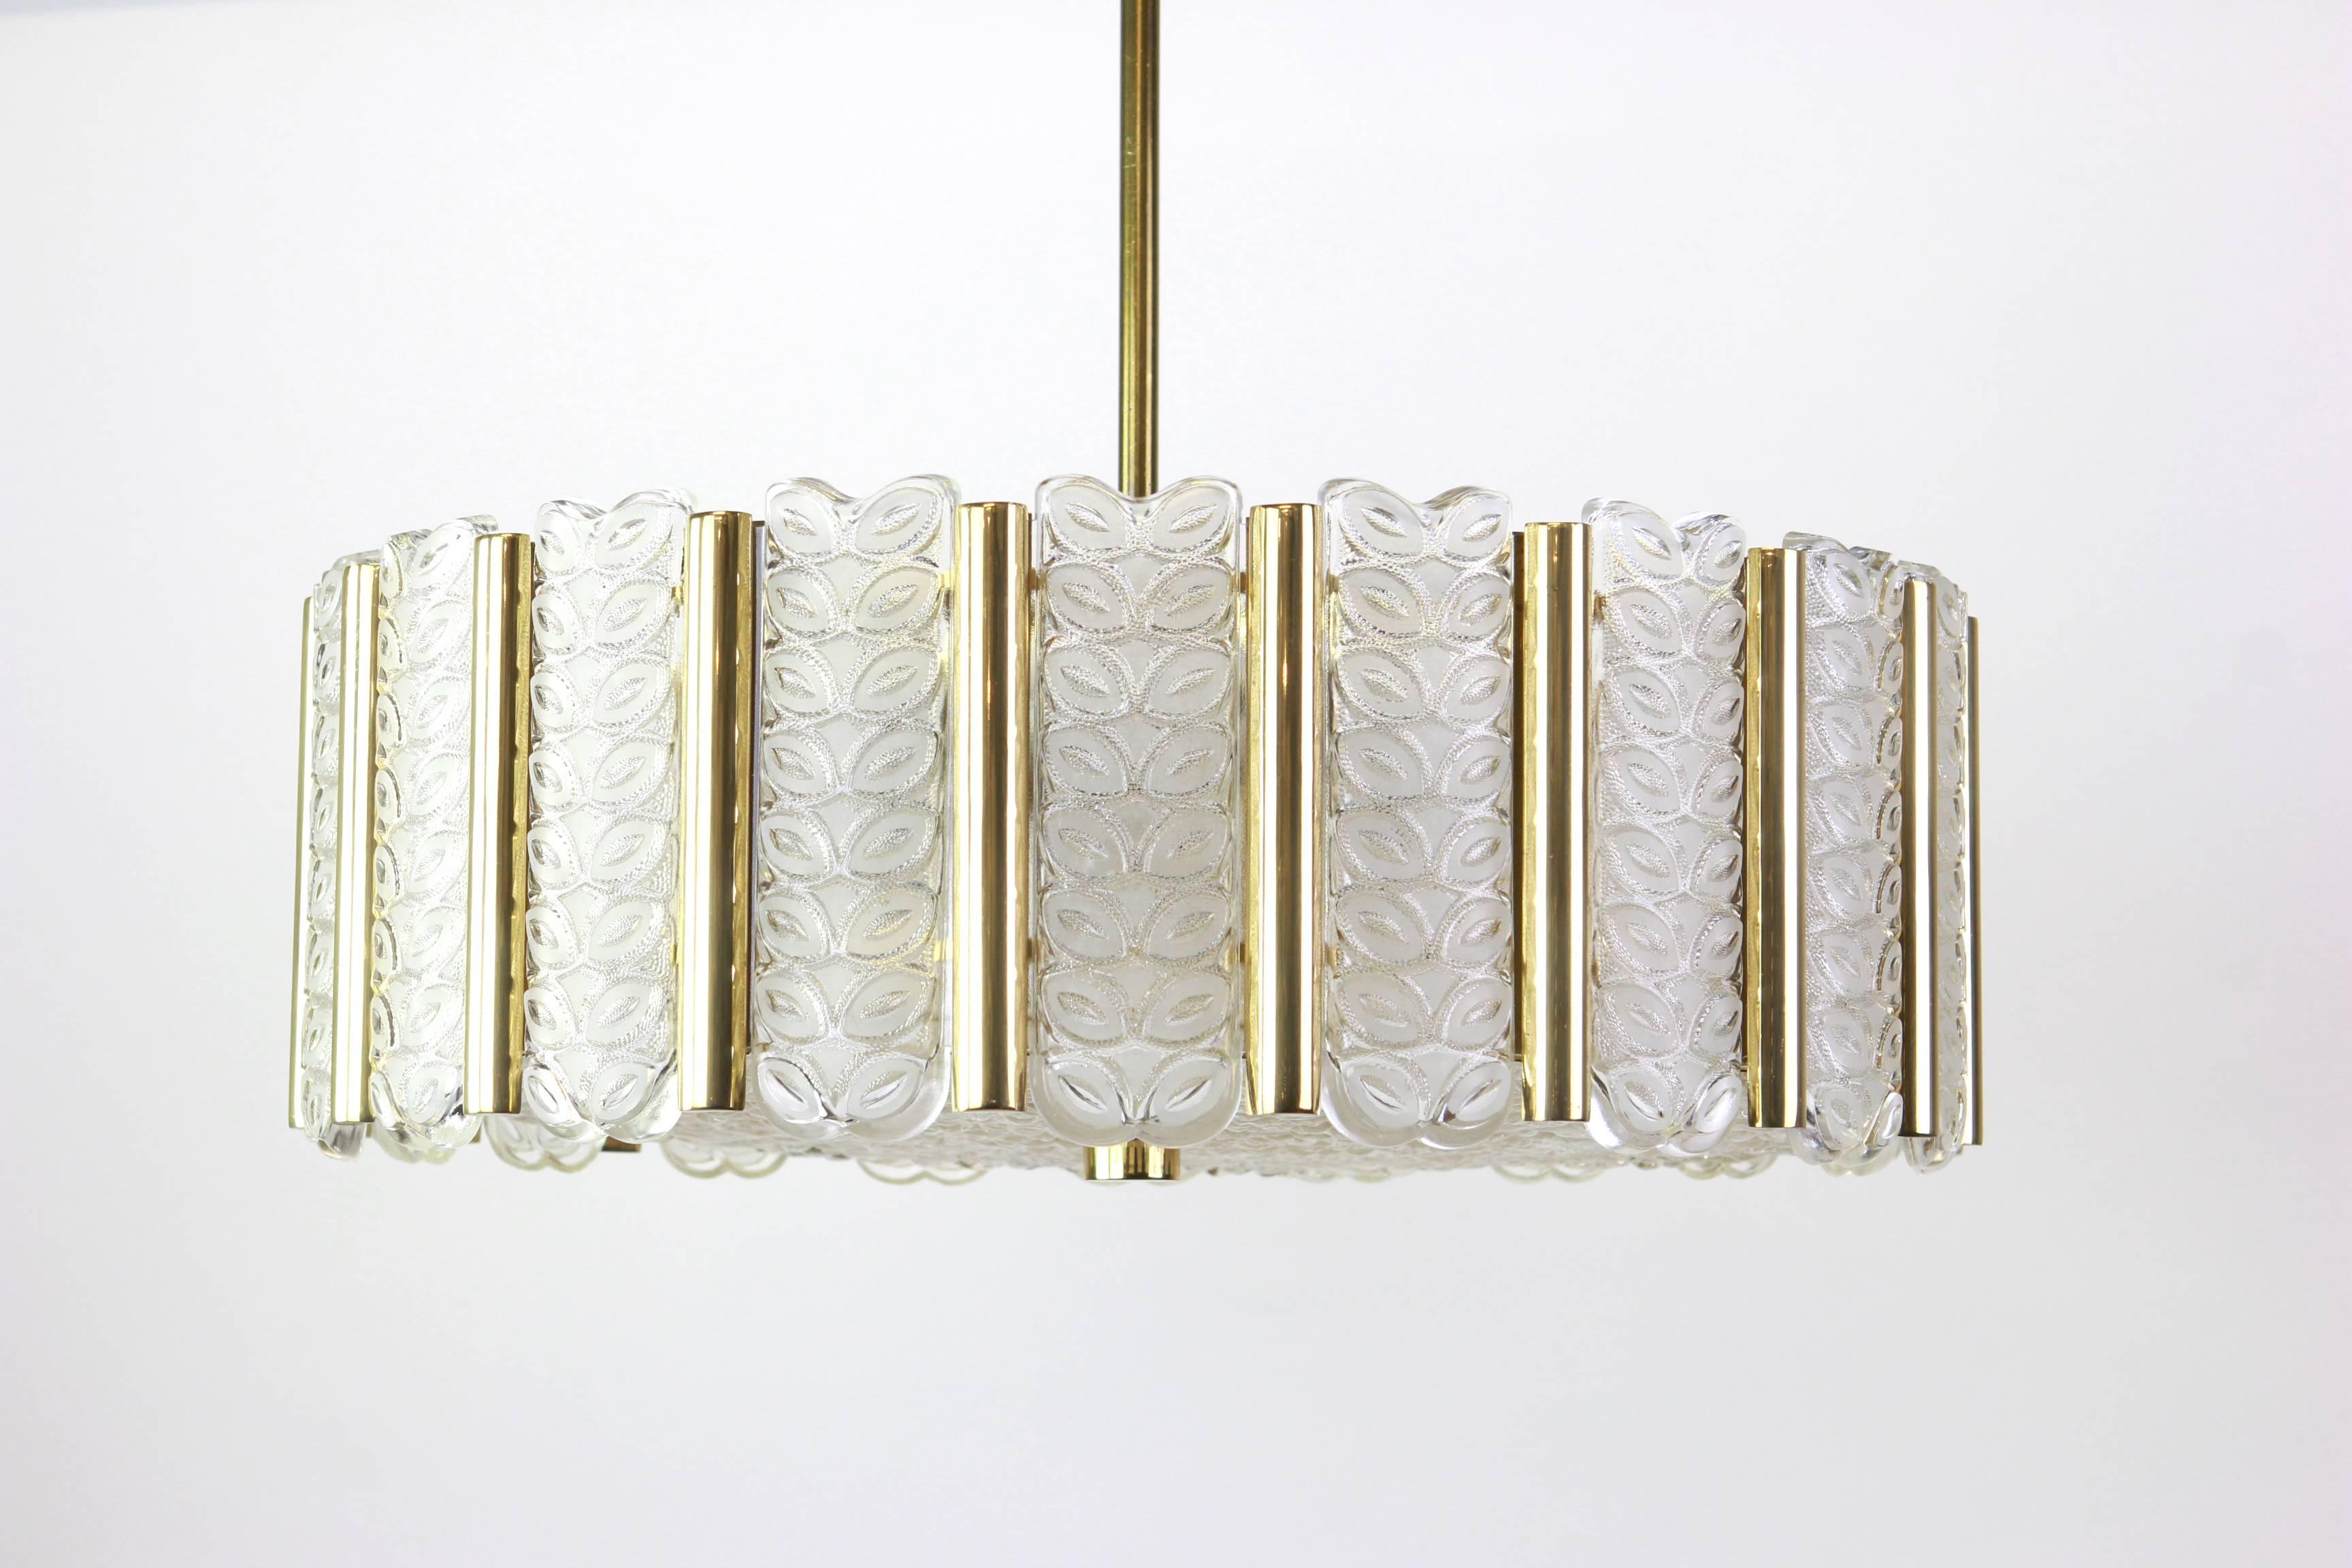 Gold-plated drum-shaped chandelier with 24 frosted glass panels on a brass frame with a wonderful pattern. Made by Kalmar, Austria. 

High quality and in very good condition. Cleaned, well-wired and ready to use. 

The fixture requires 9 x E14